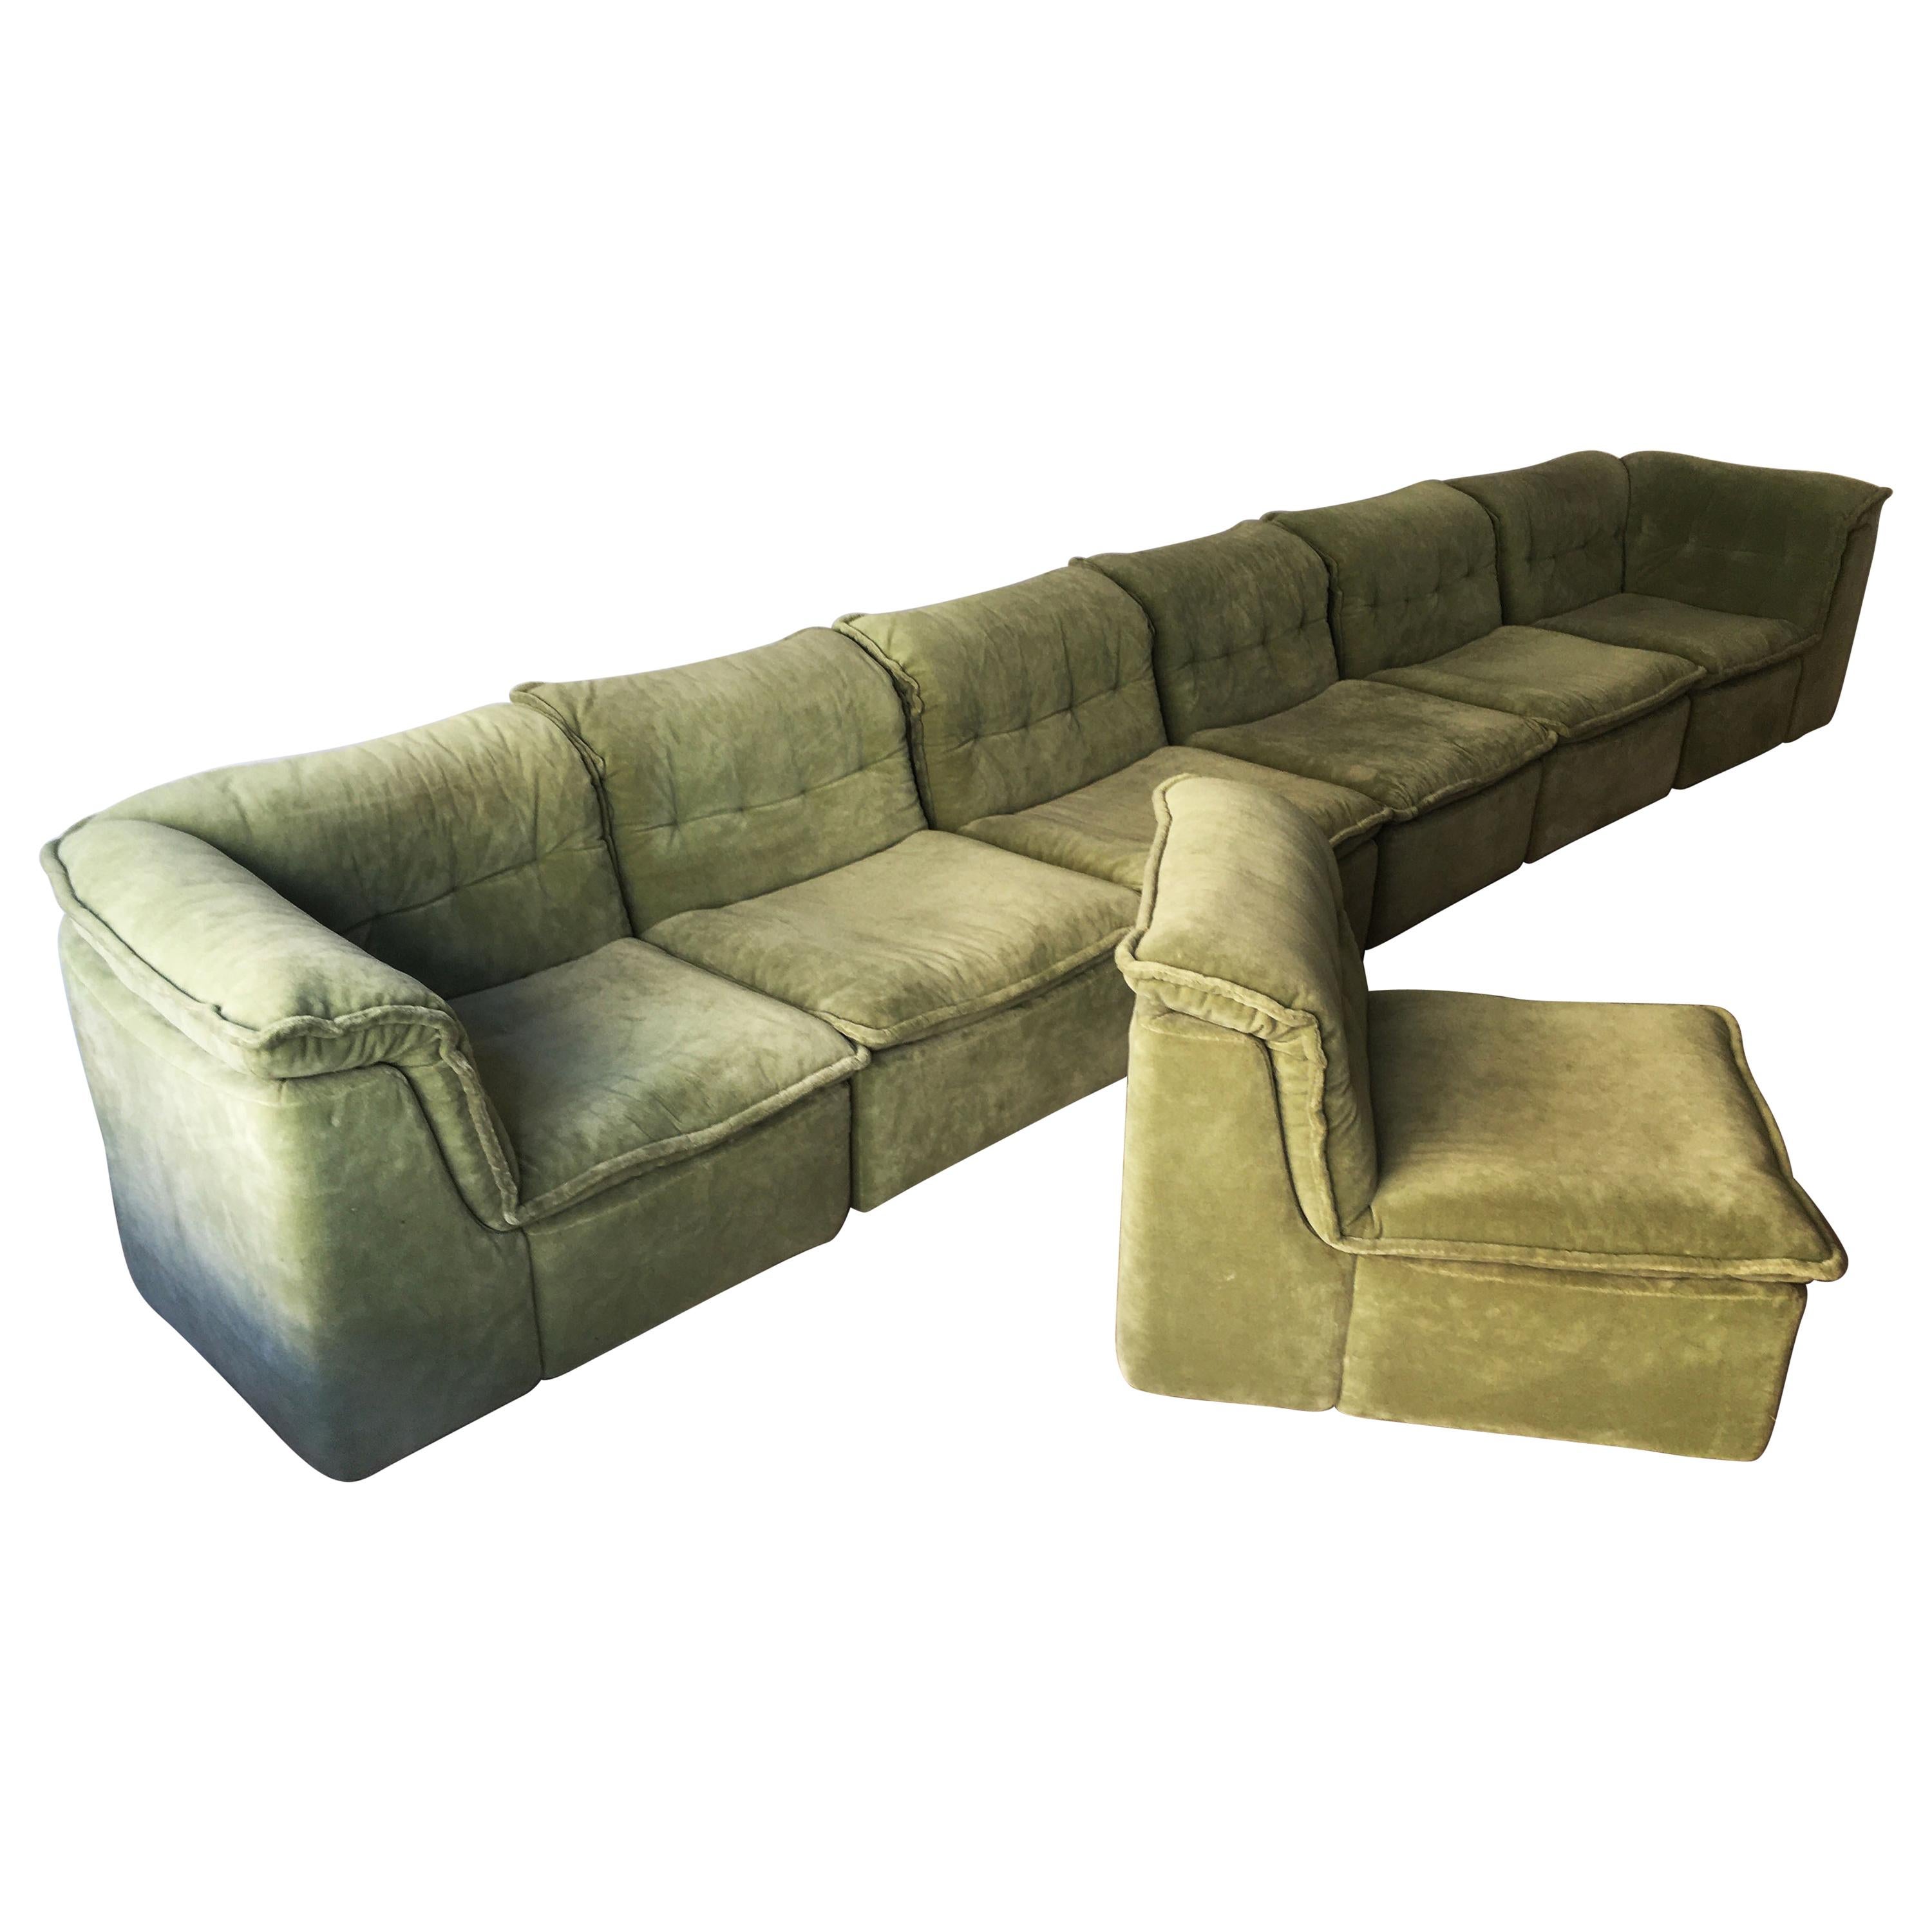 Vintage Rolf Benz Modular Sectional Sofa Suite, Germany, 1970 at 1stDibs